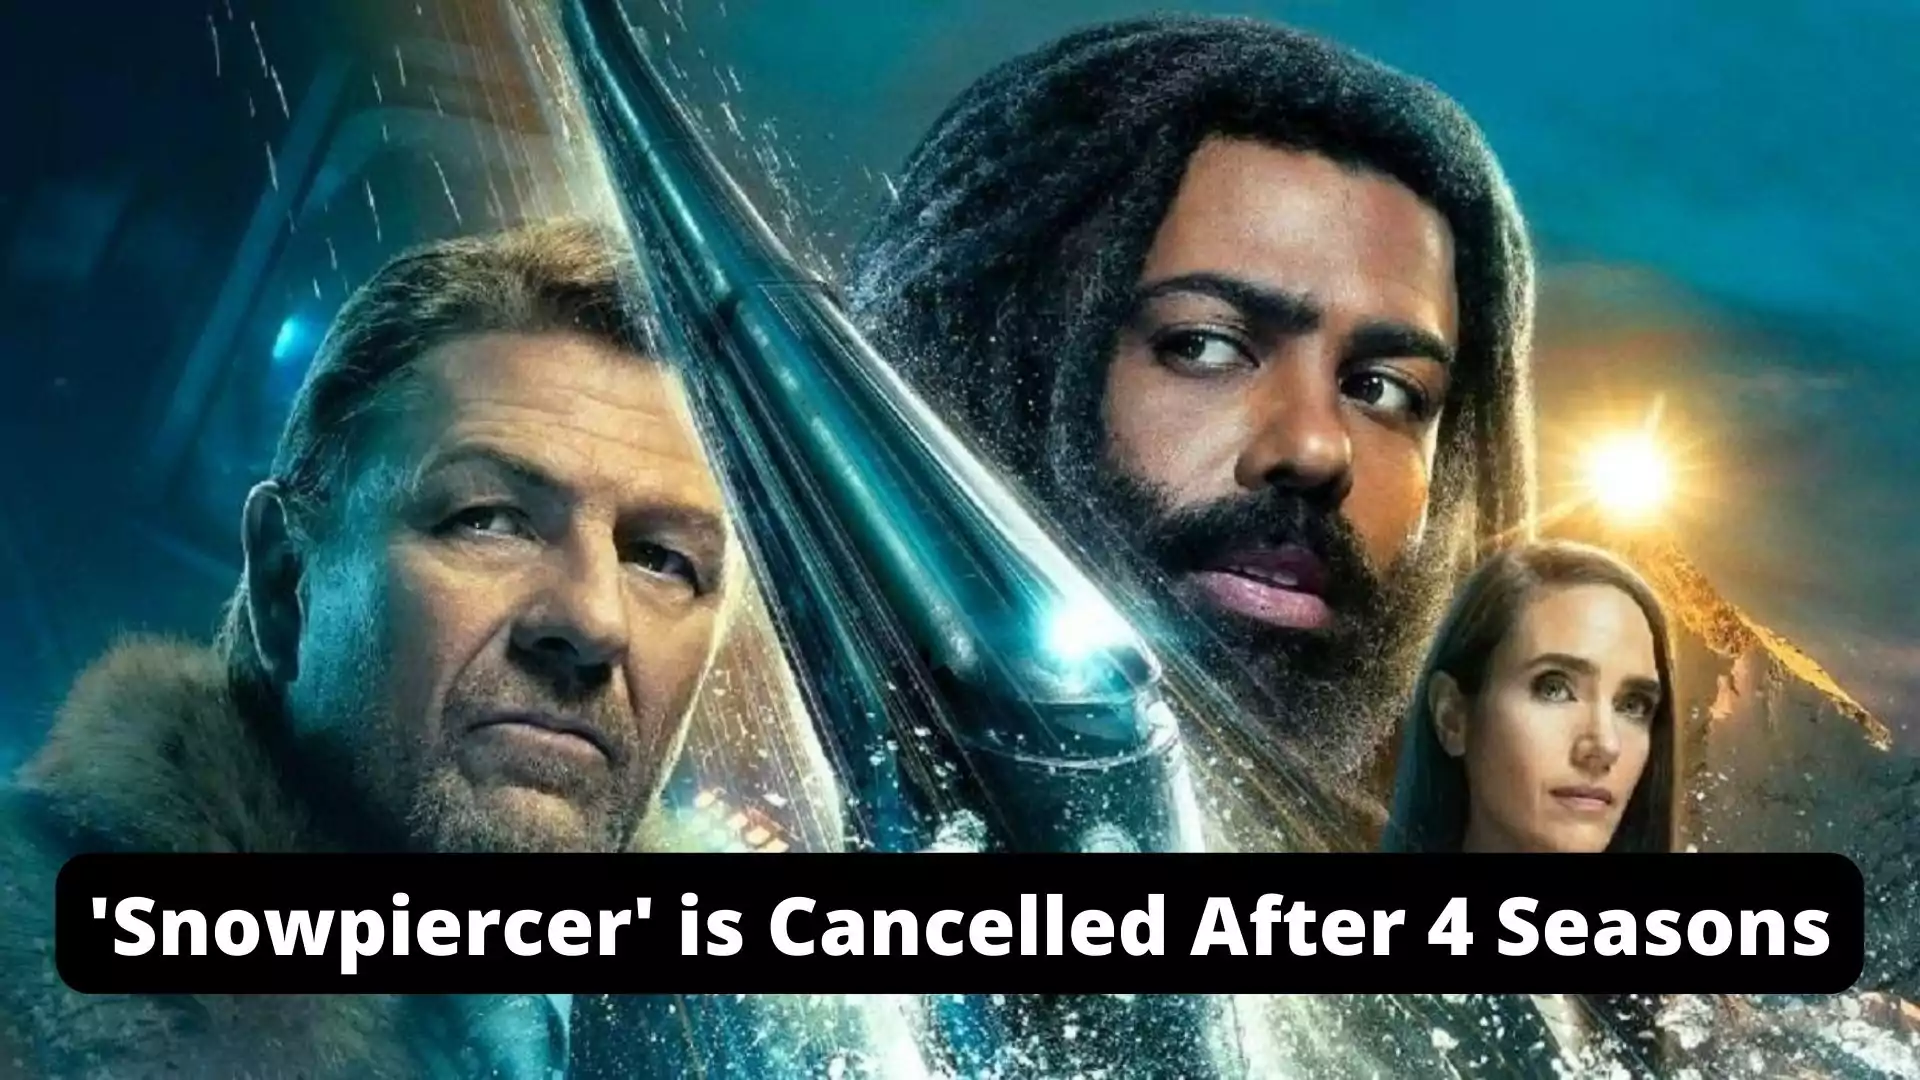 TNT 'Snowpiercer' is Cancelled After 4 Seasons